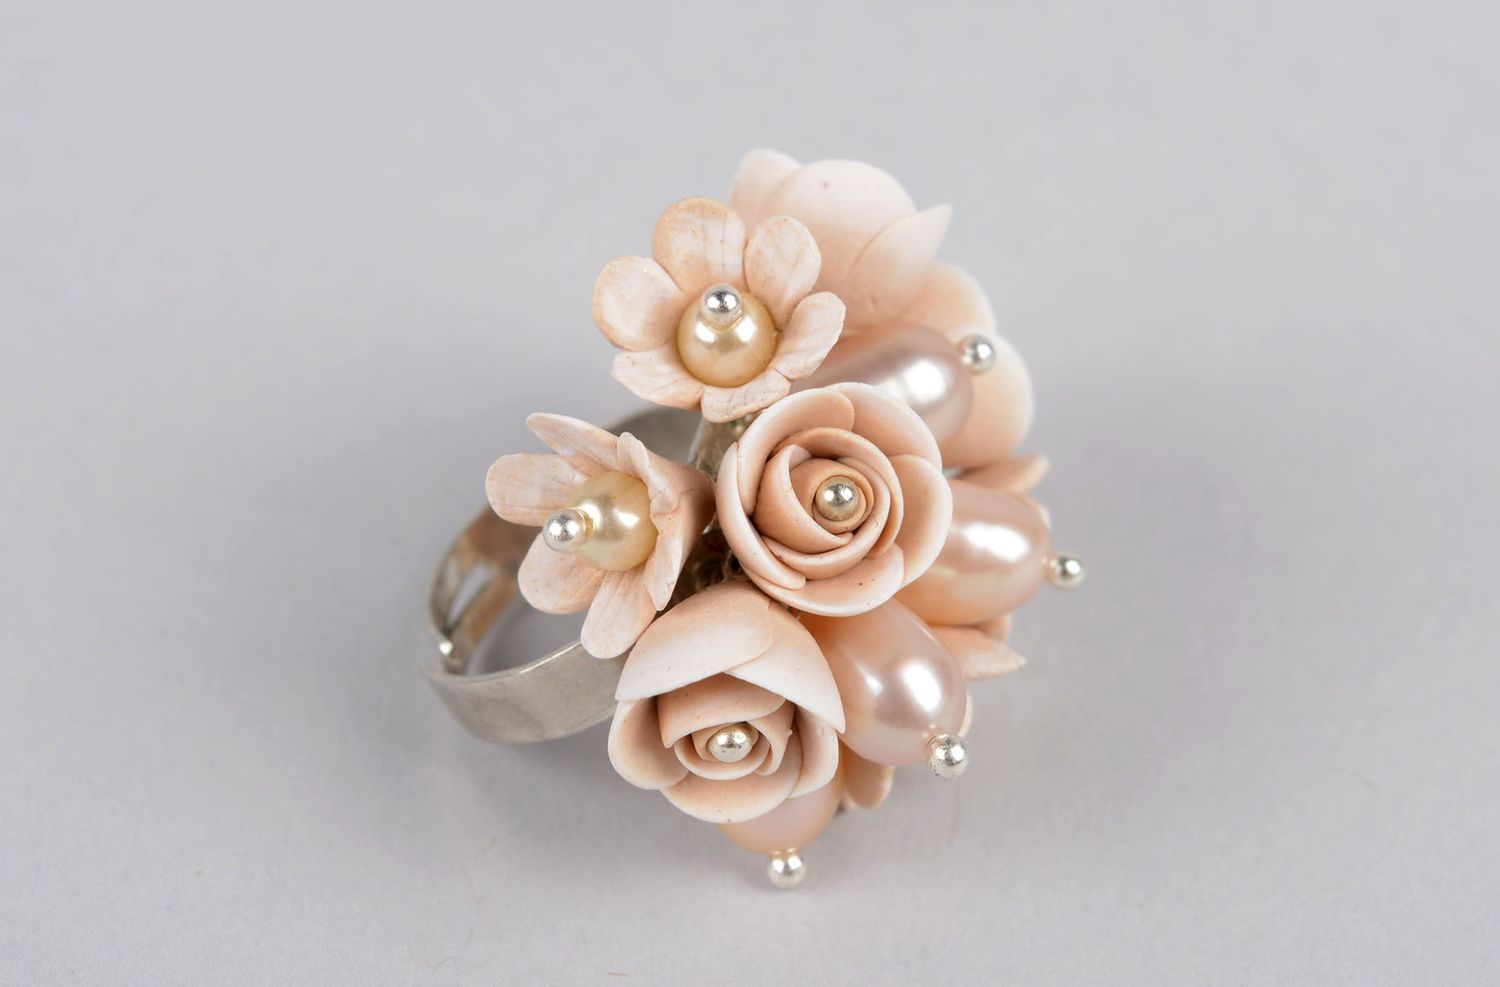 Handmade polymer clay ring with flowers stylish ring fashion jewelry for women photo 1